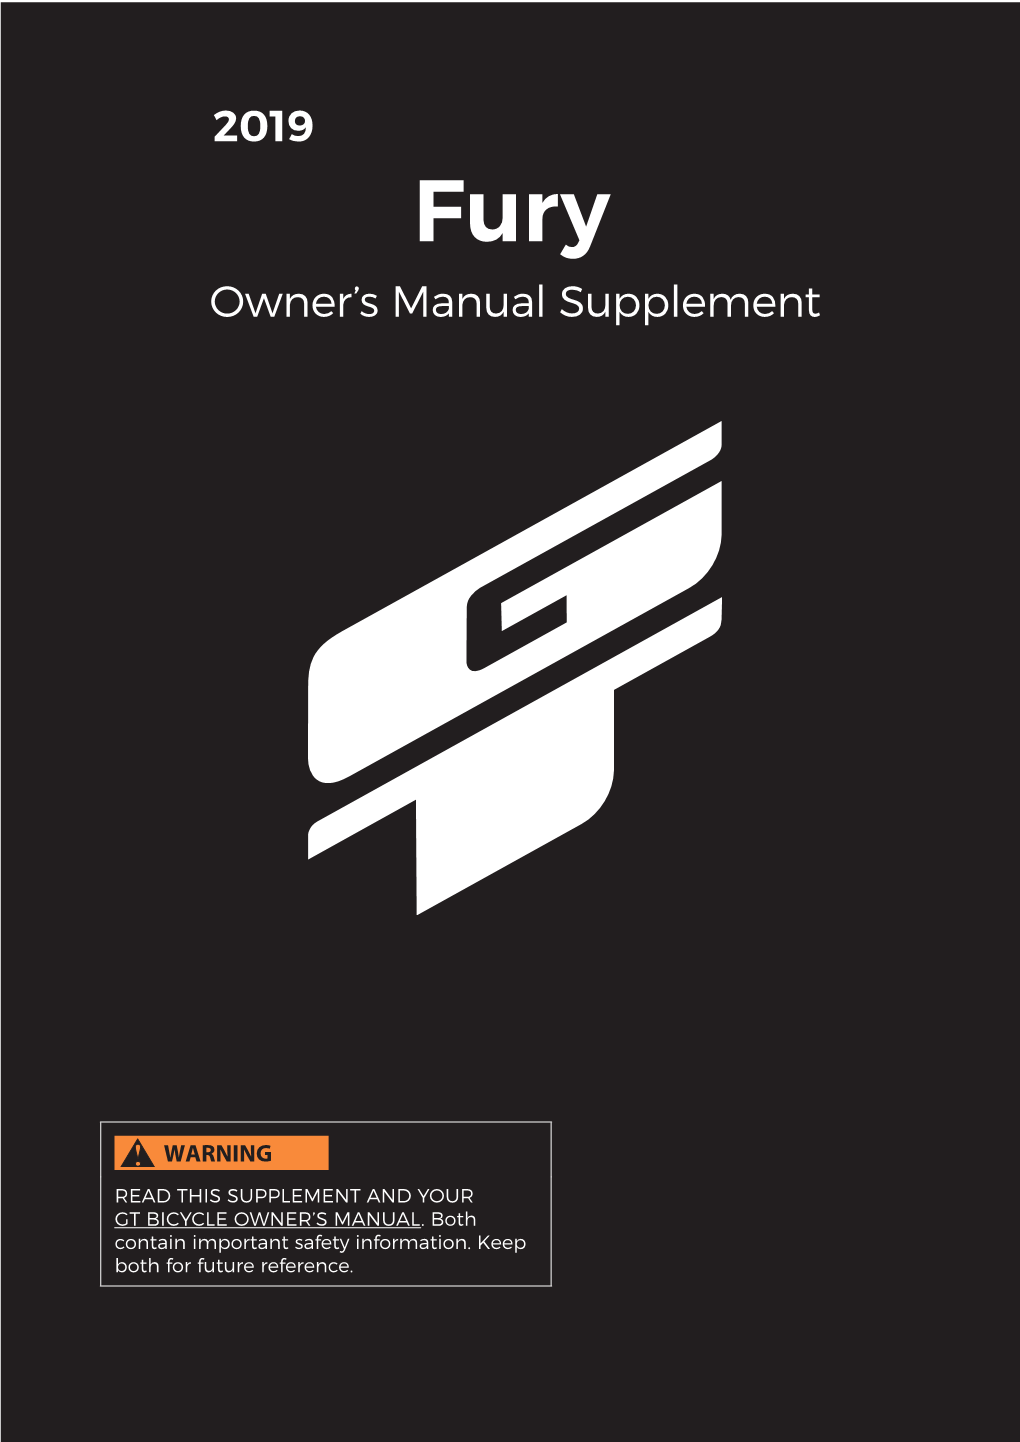 2019 Owner's Manual Supplement